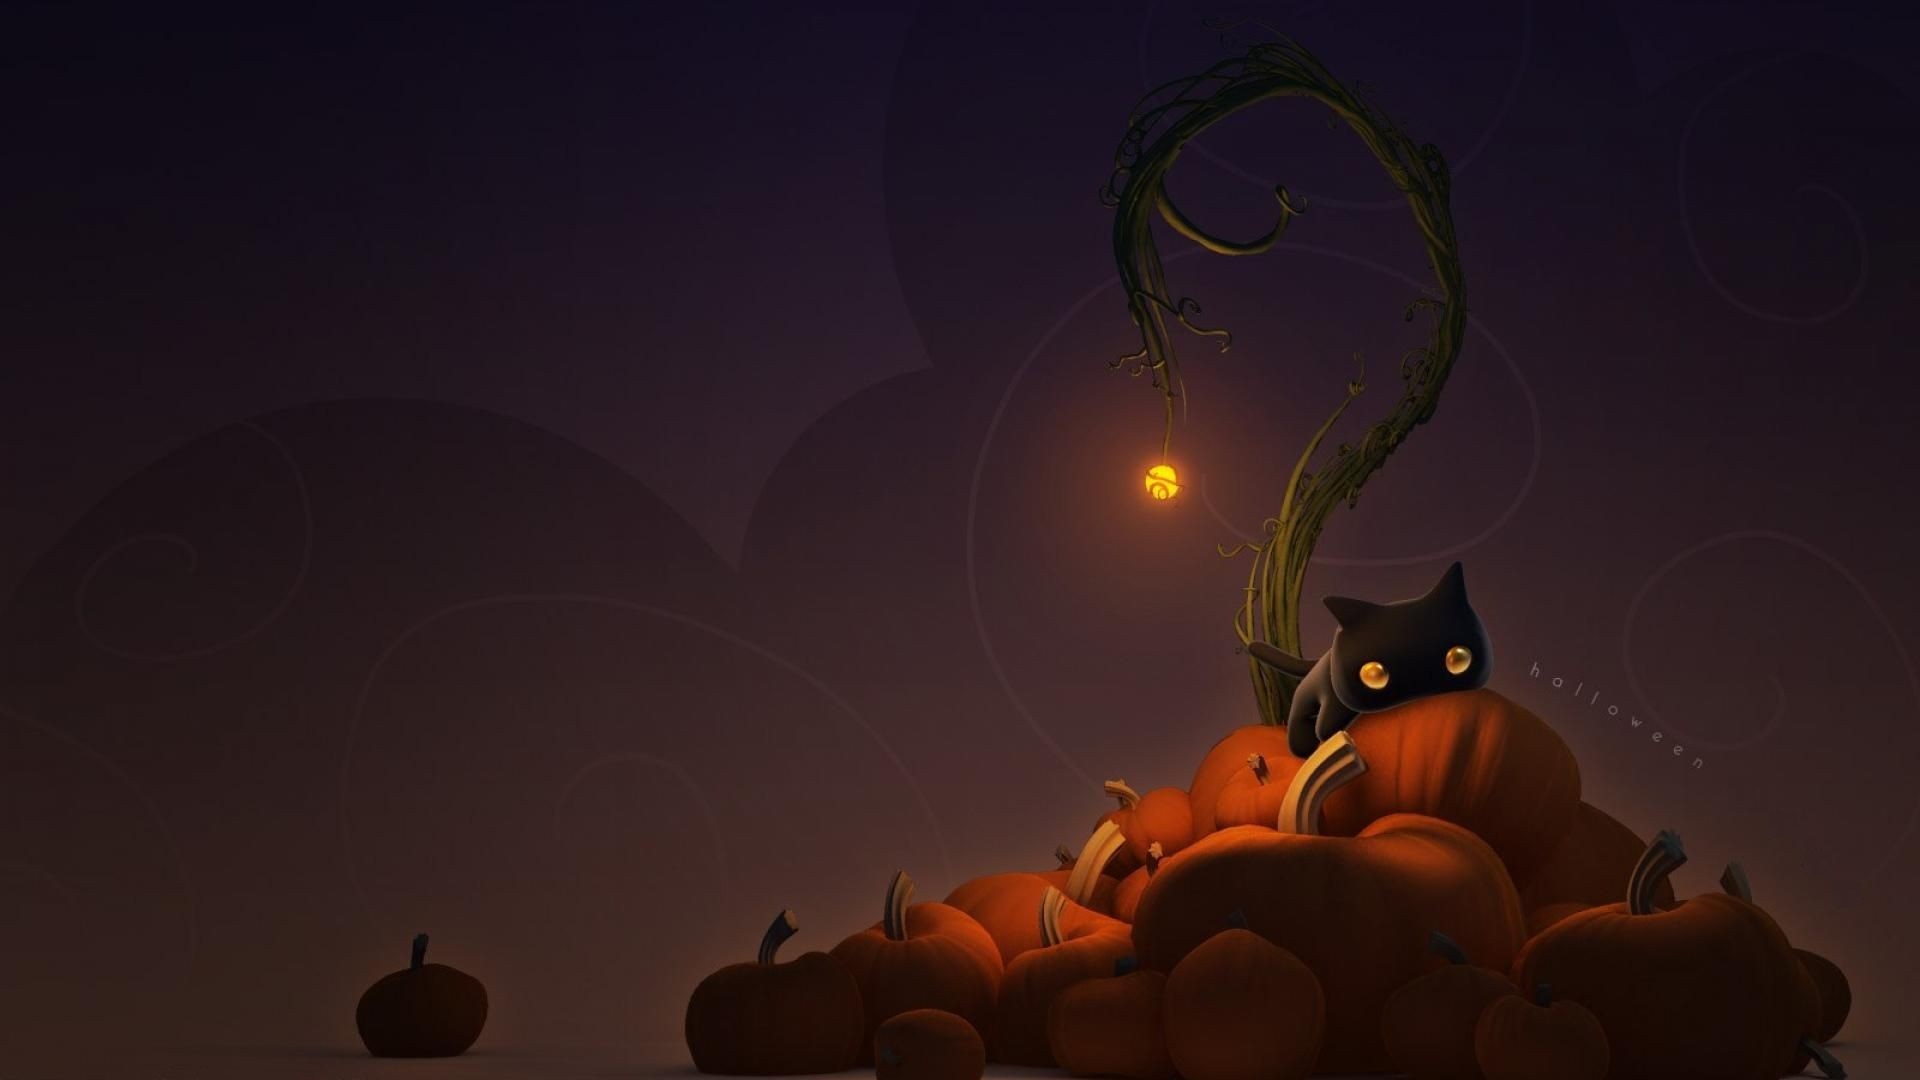 Cute Halloween Wallpaper with high-resolution 1920x1080 pixel. You can use this wallpaper for your Windows and Mac OS computers as well as your Android and iPhone smartphones